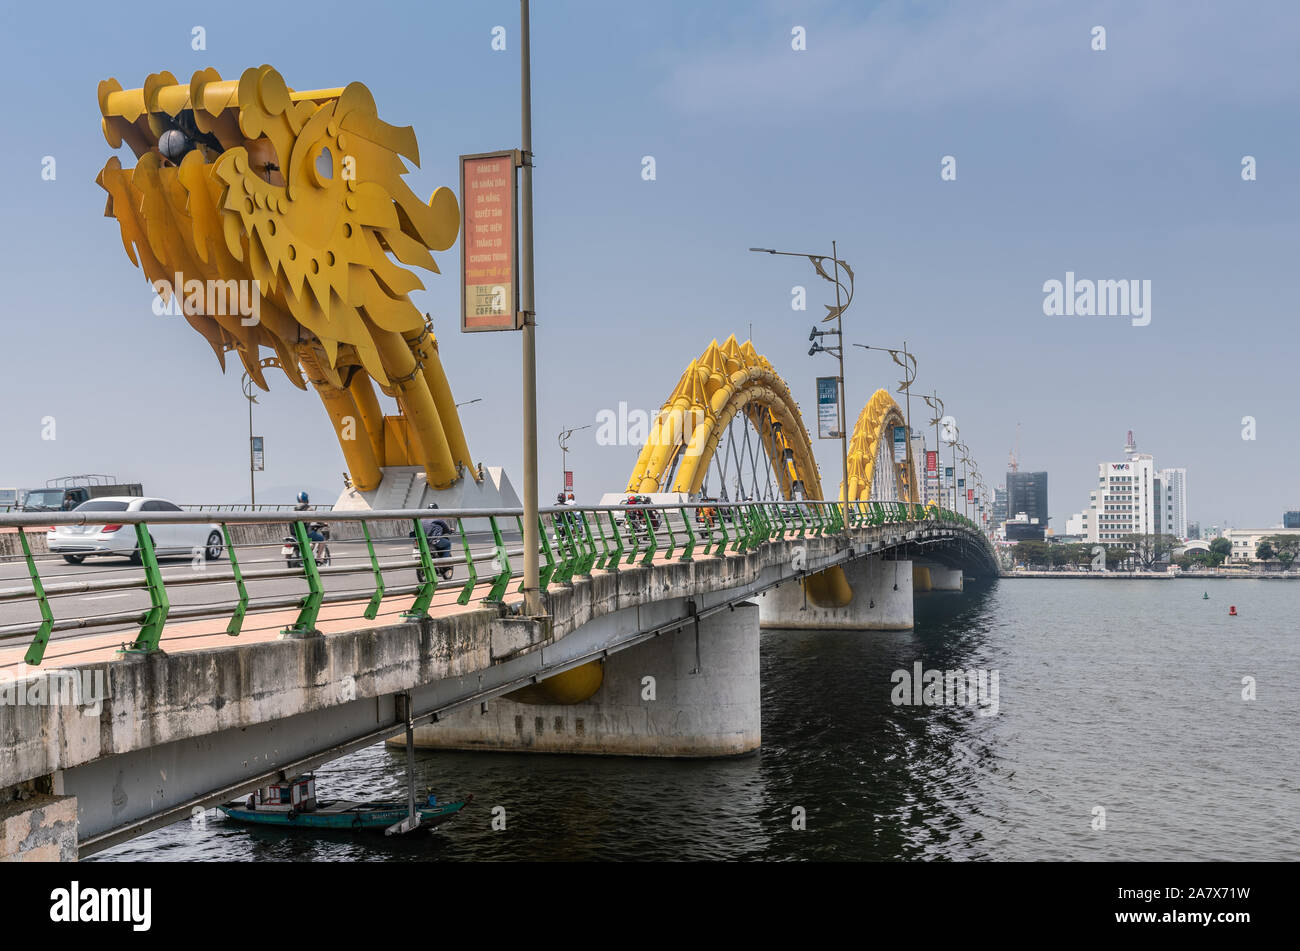 Da Nang, Vietnam - March 10, 2019: Cau Rong or Dragon bridge from east, head, to west, tail under blue sky. Traffic on bridge and Vietnam Television C Stock Photo